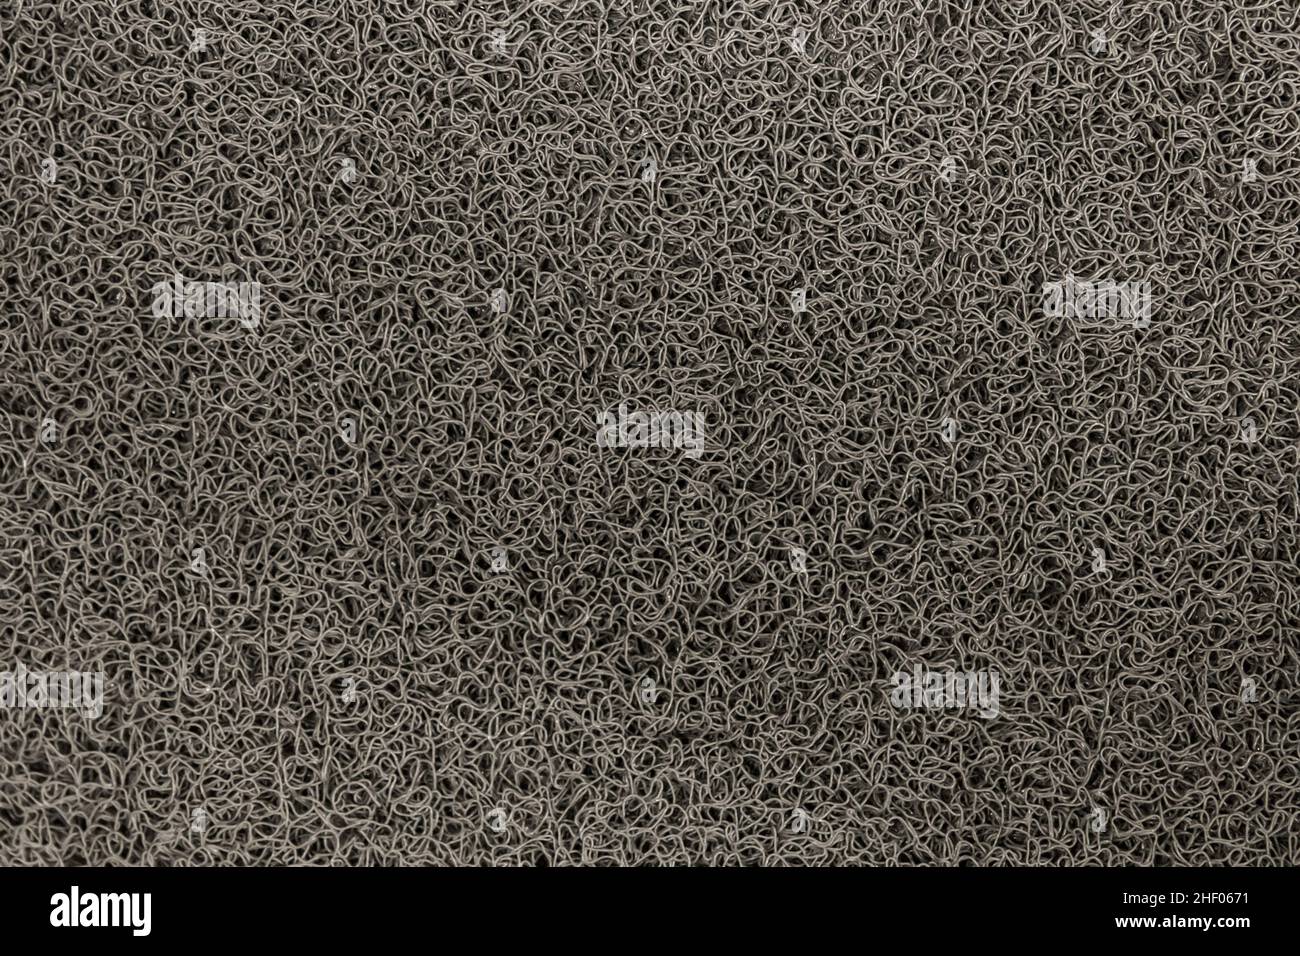 Dark carpet rough texture surface with abstract background black pattern. Stock Photo